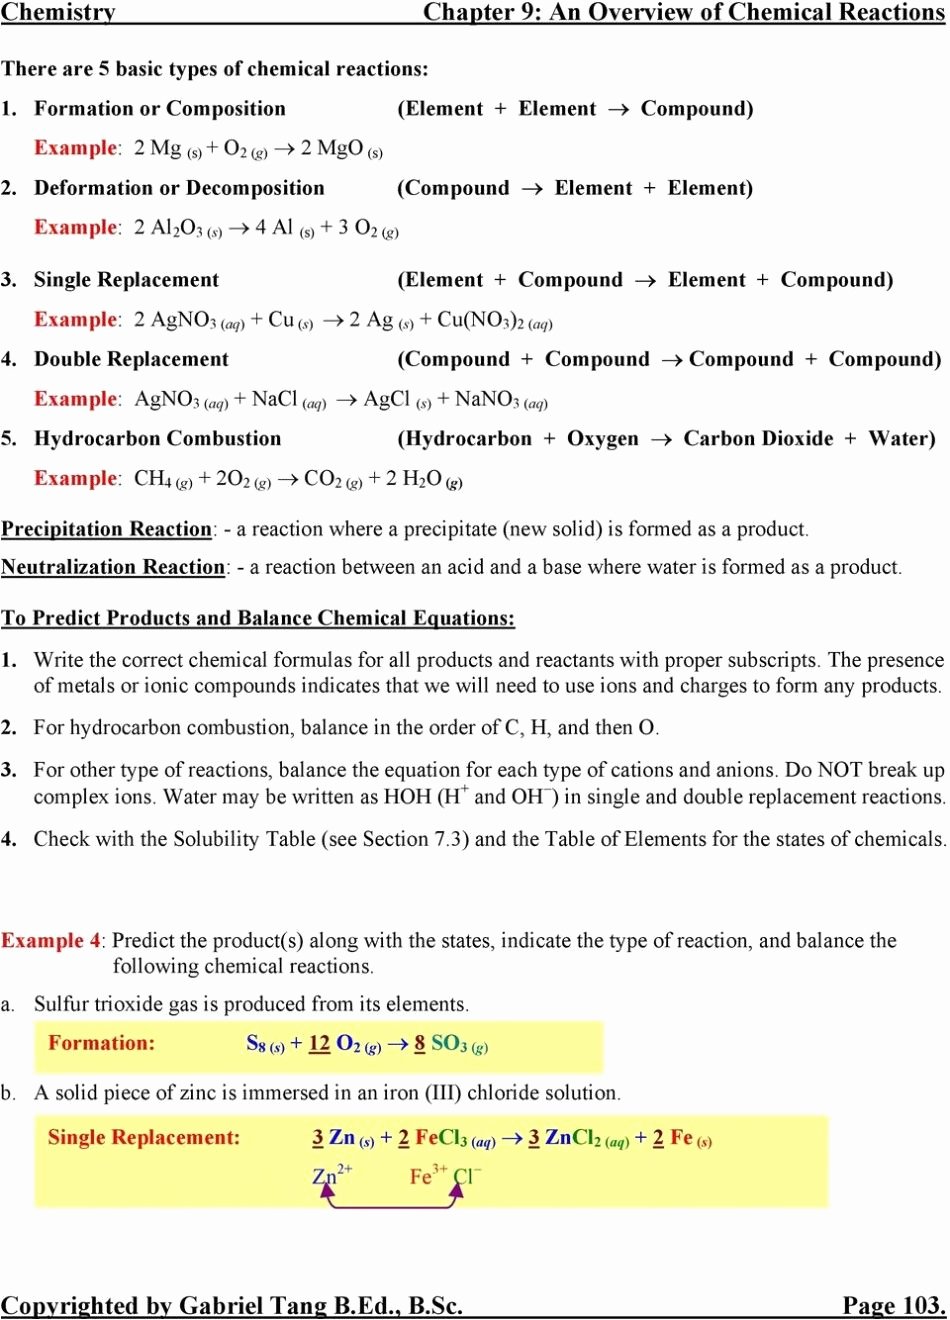 Elements Compounds Mixtures Worksheet Answers Beautiful Elements Pounds and Mixtures 1 Worksheet Answers